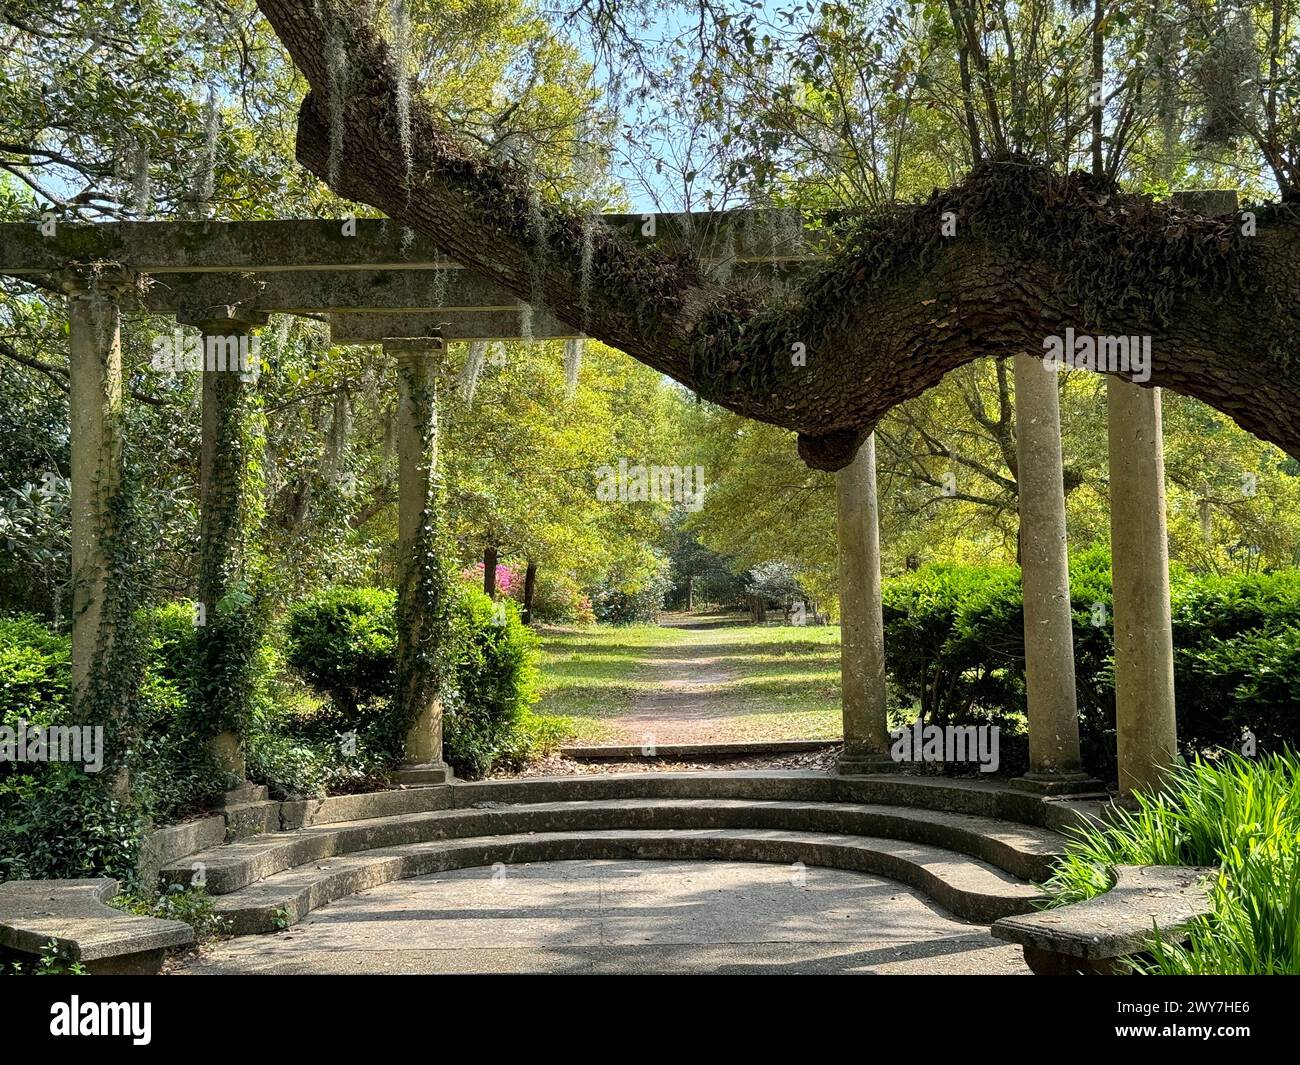 A park bench with archway and trees in the background Stock Photo